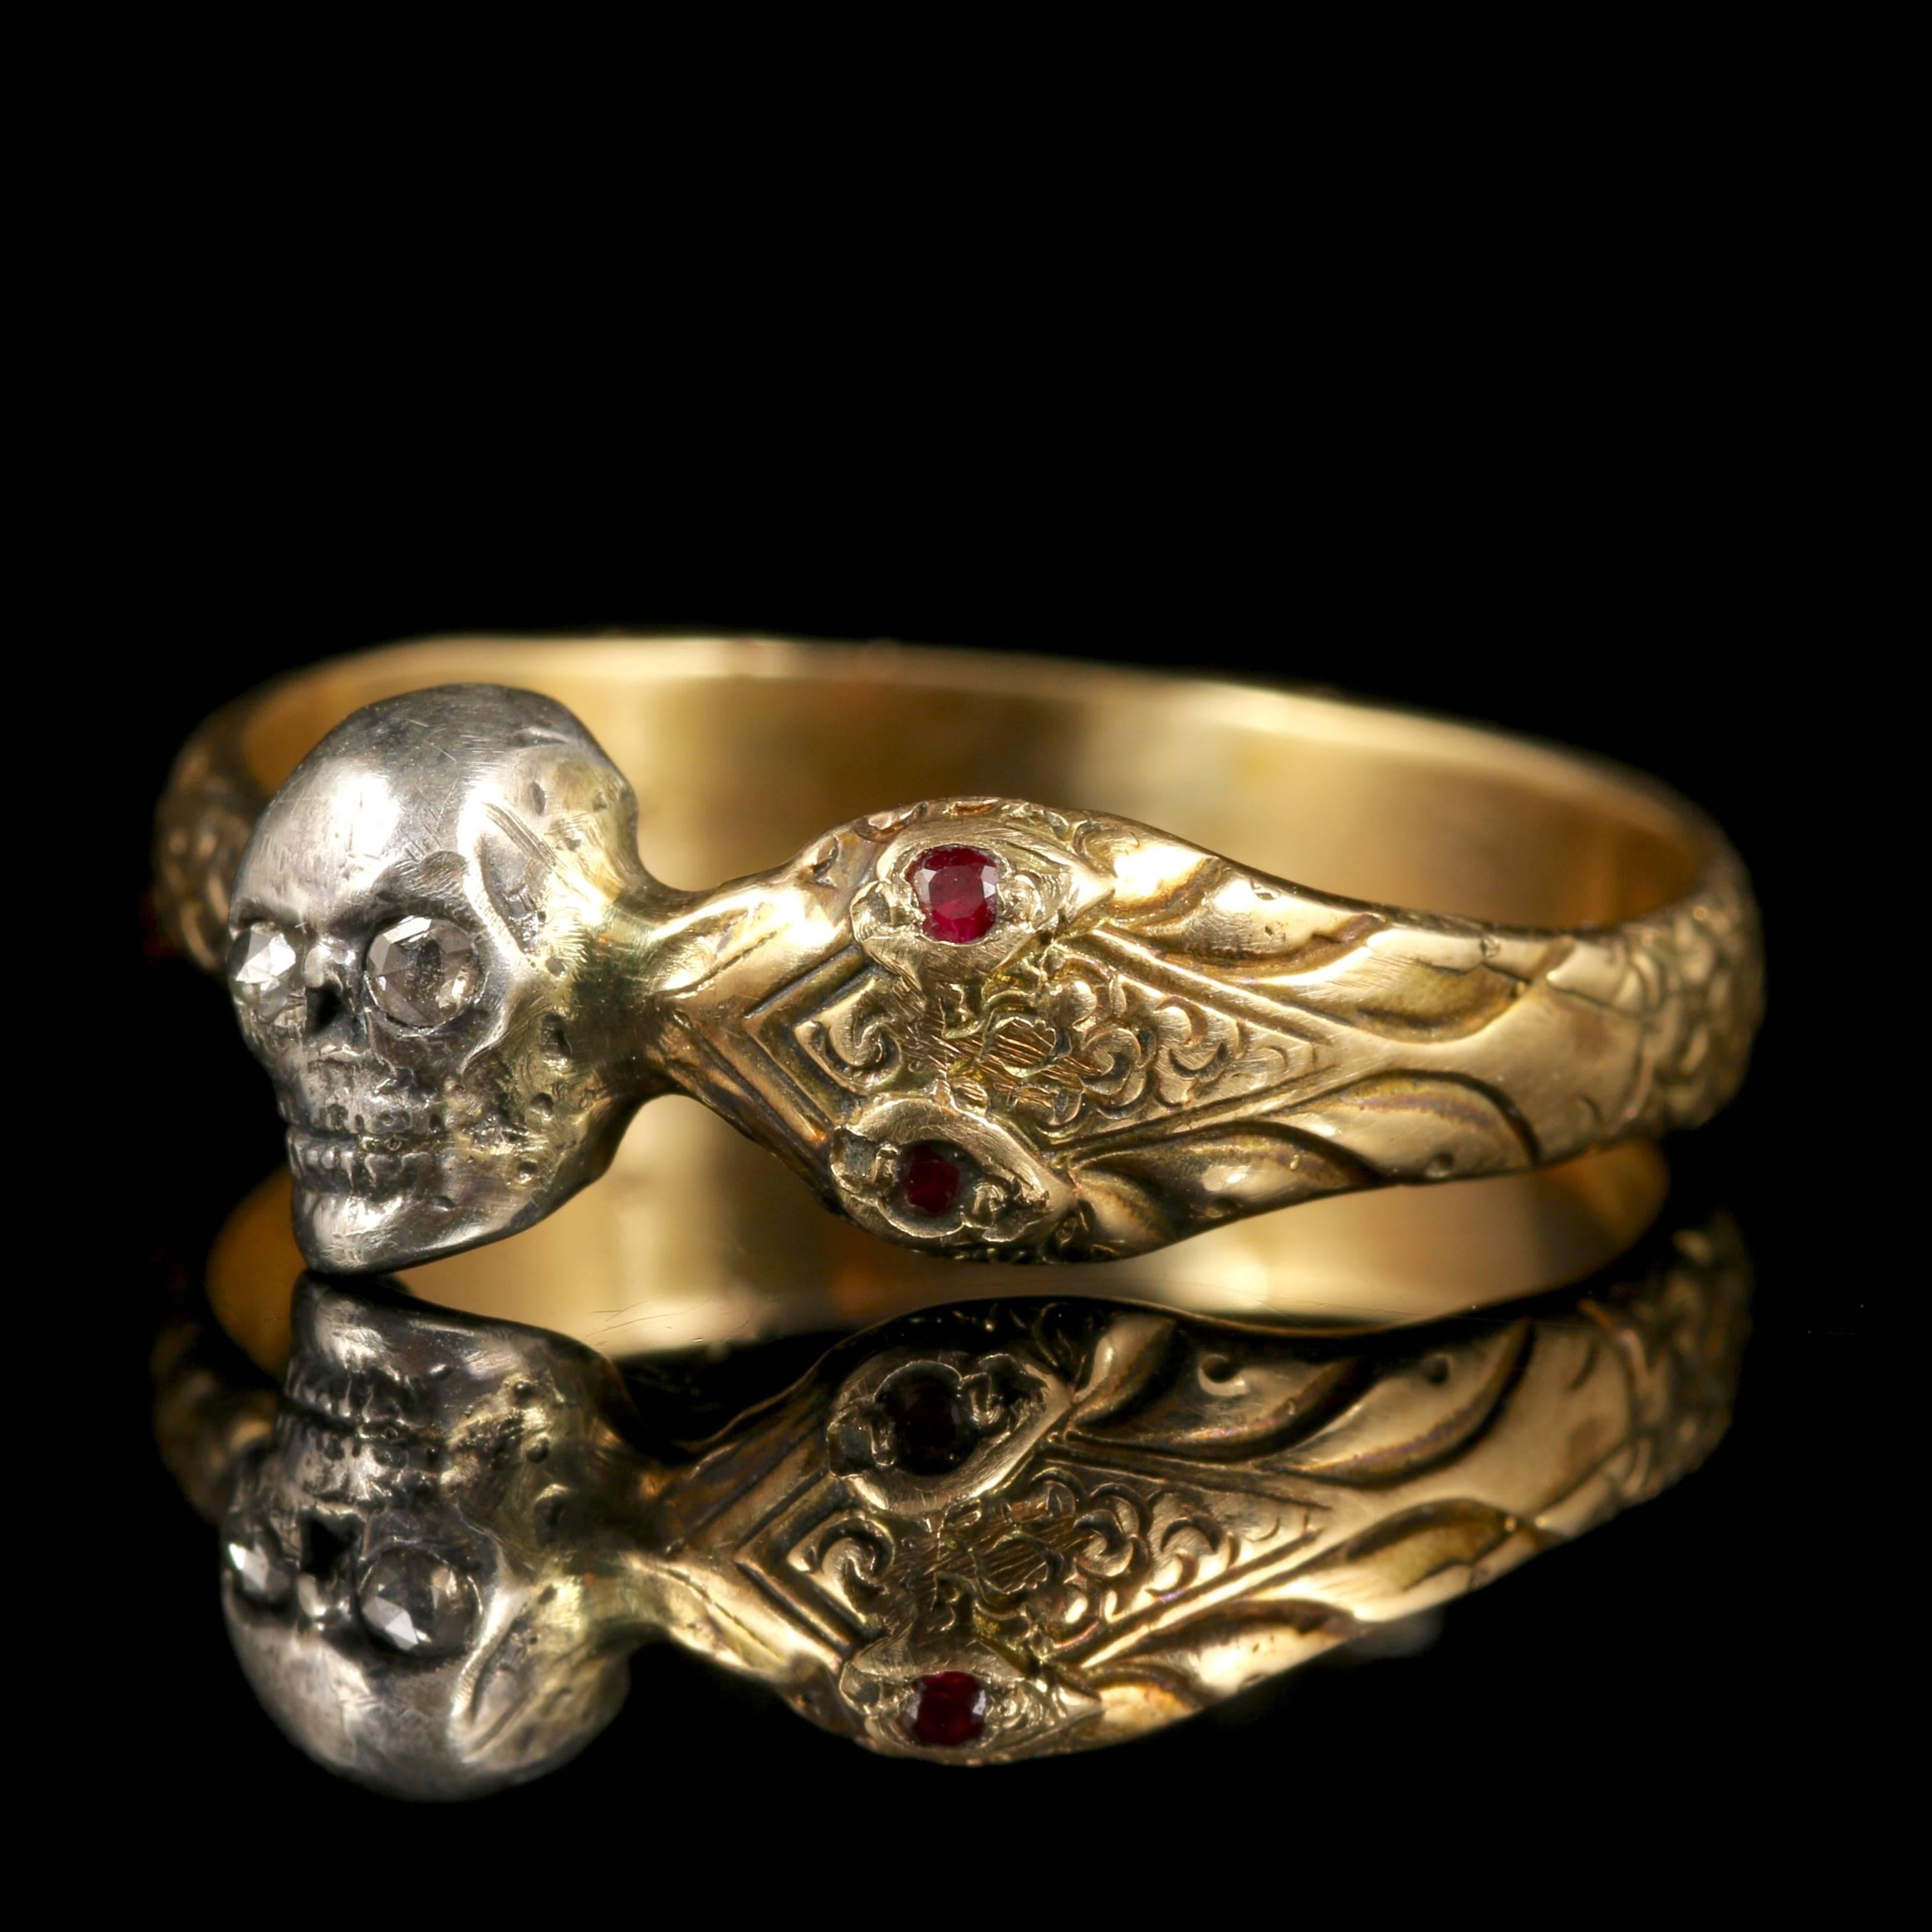 This 18ct Yellow Gold Memento Mori Diamond Skull and Snake ring is stunning.

Skull jewellery (Memento Mori) is very collectable. 

Memento Mori means -Remember that you must die- and to cherish each day as it is a reminder of the imminence of both